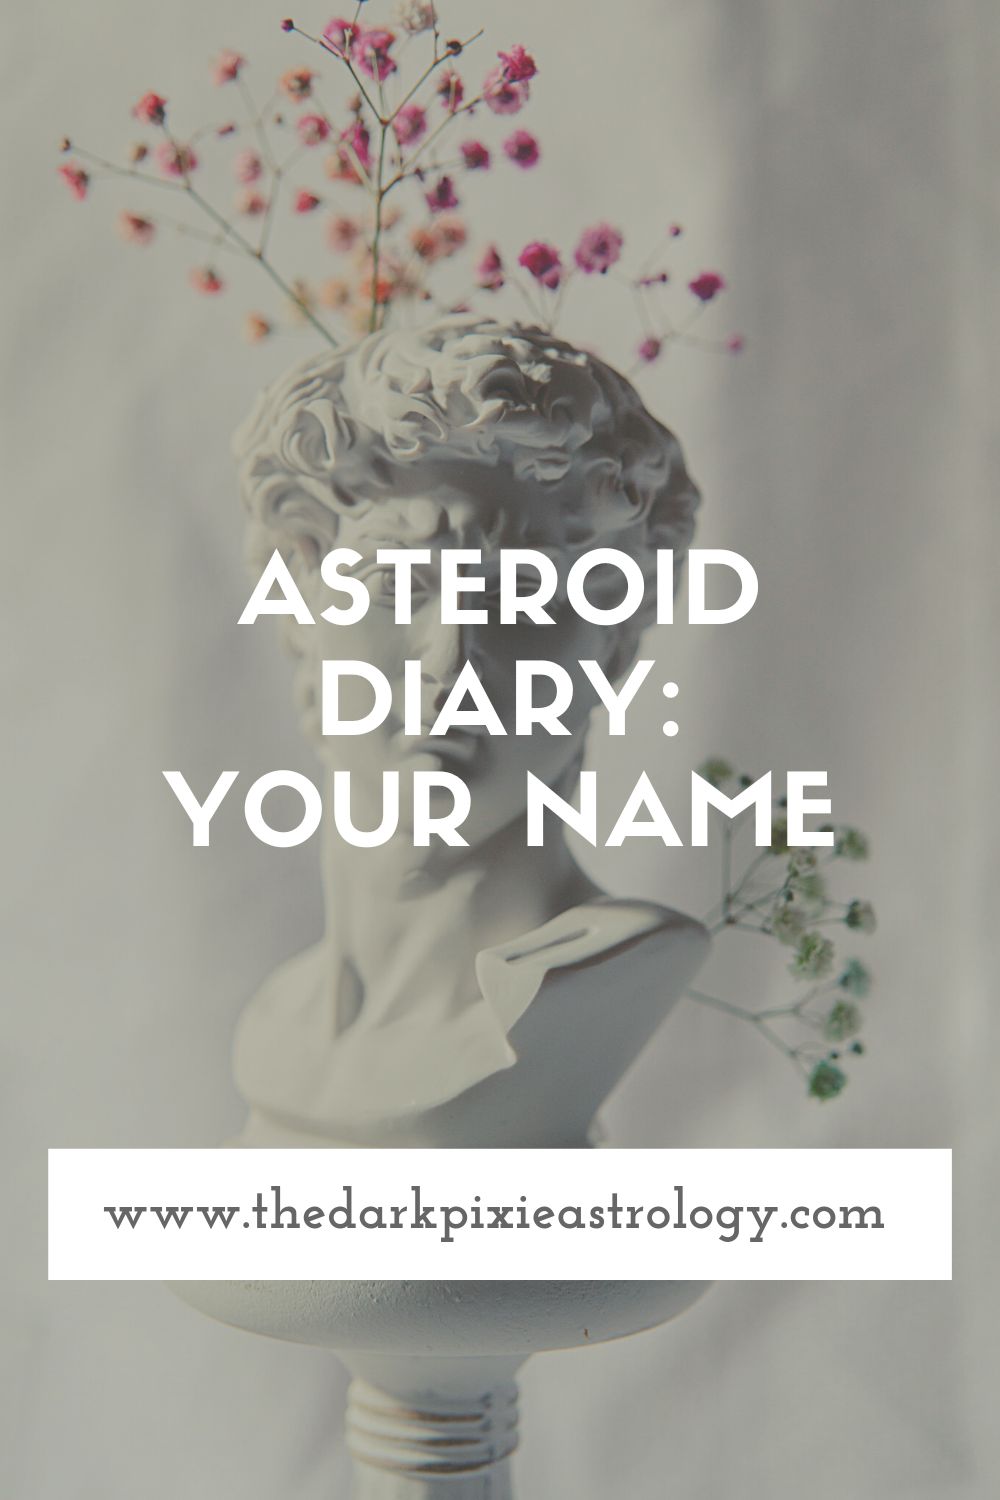 Asteroid Diary: Your Name - The Dark Pixie Astrology